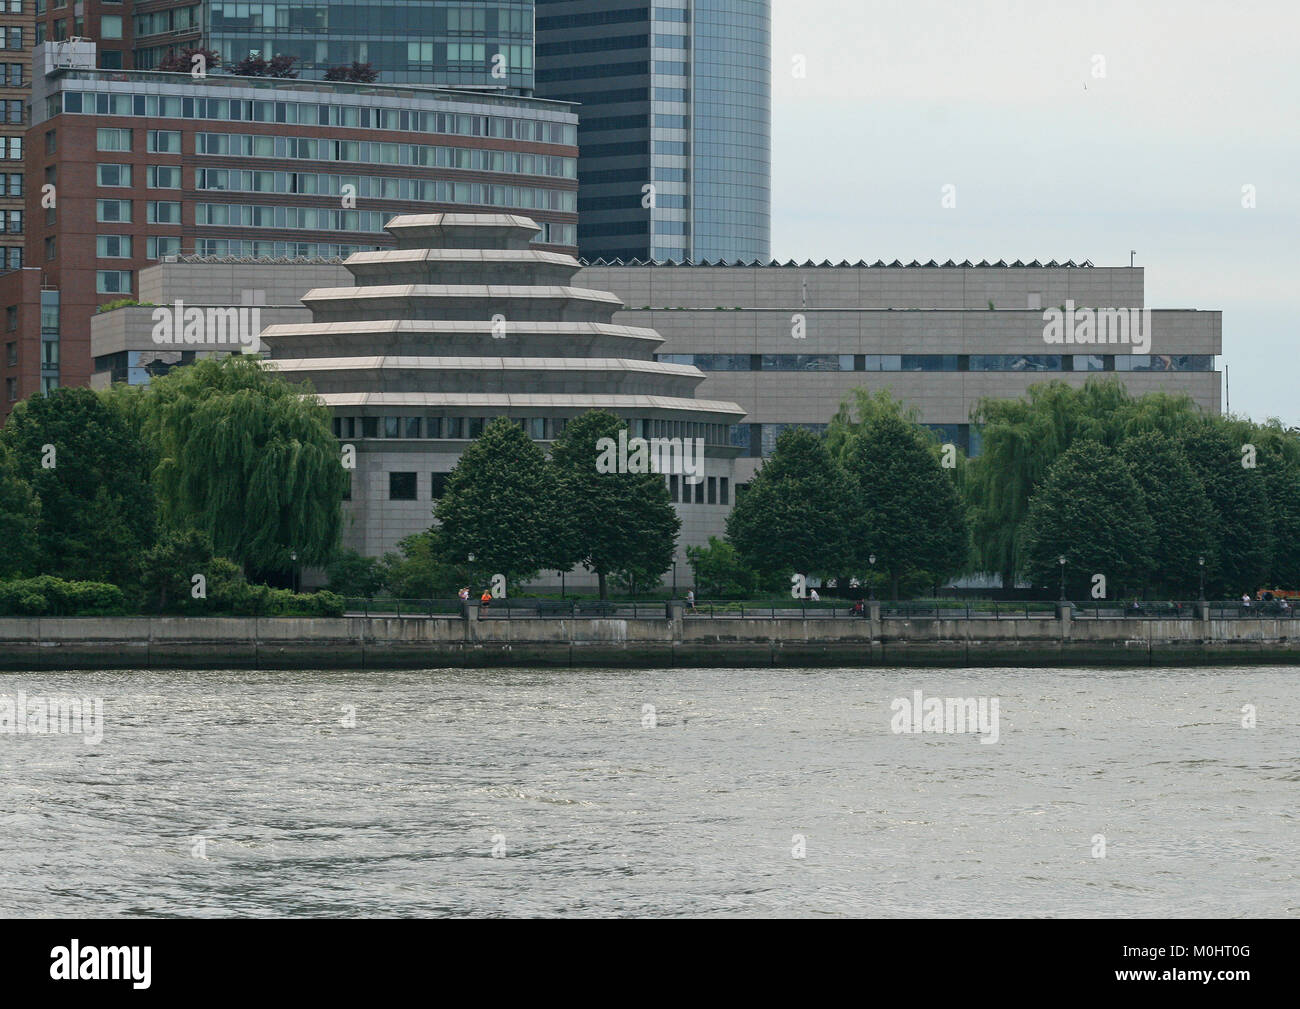 The Museum of Jewish Heritage, located in Battery Park City in Manhattan, New York City, New York Staqte, USA. Stock Photo